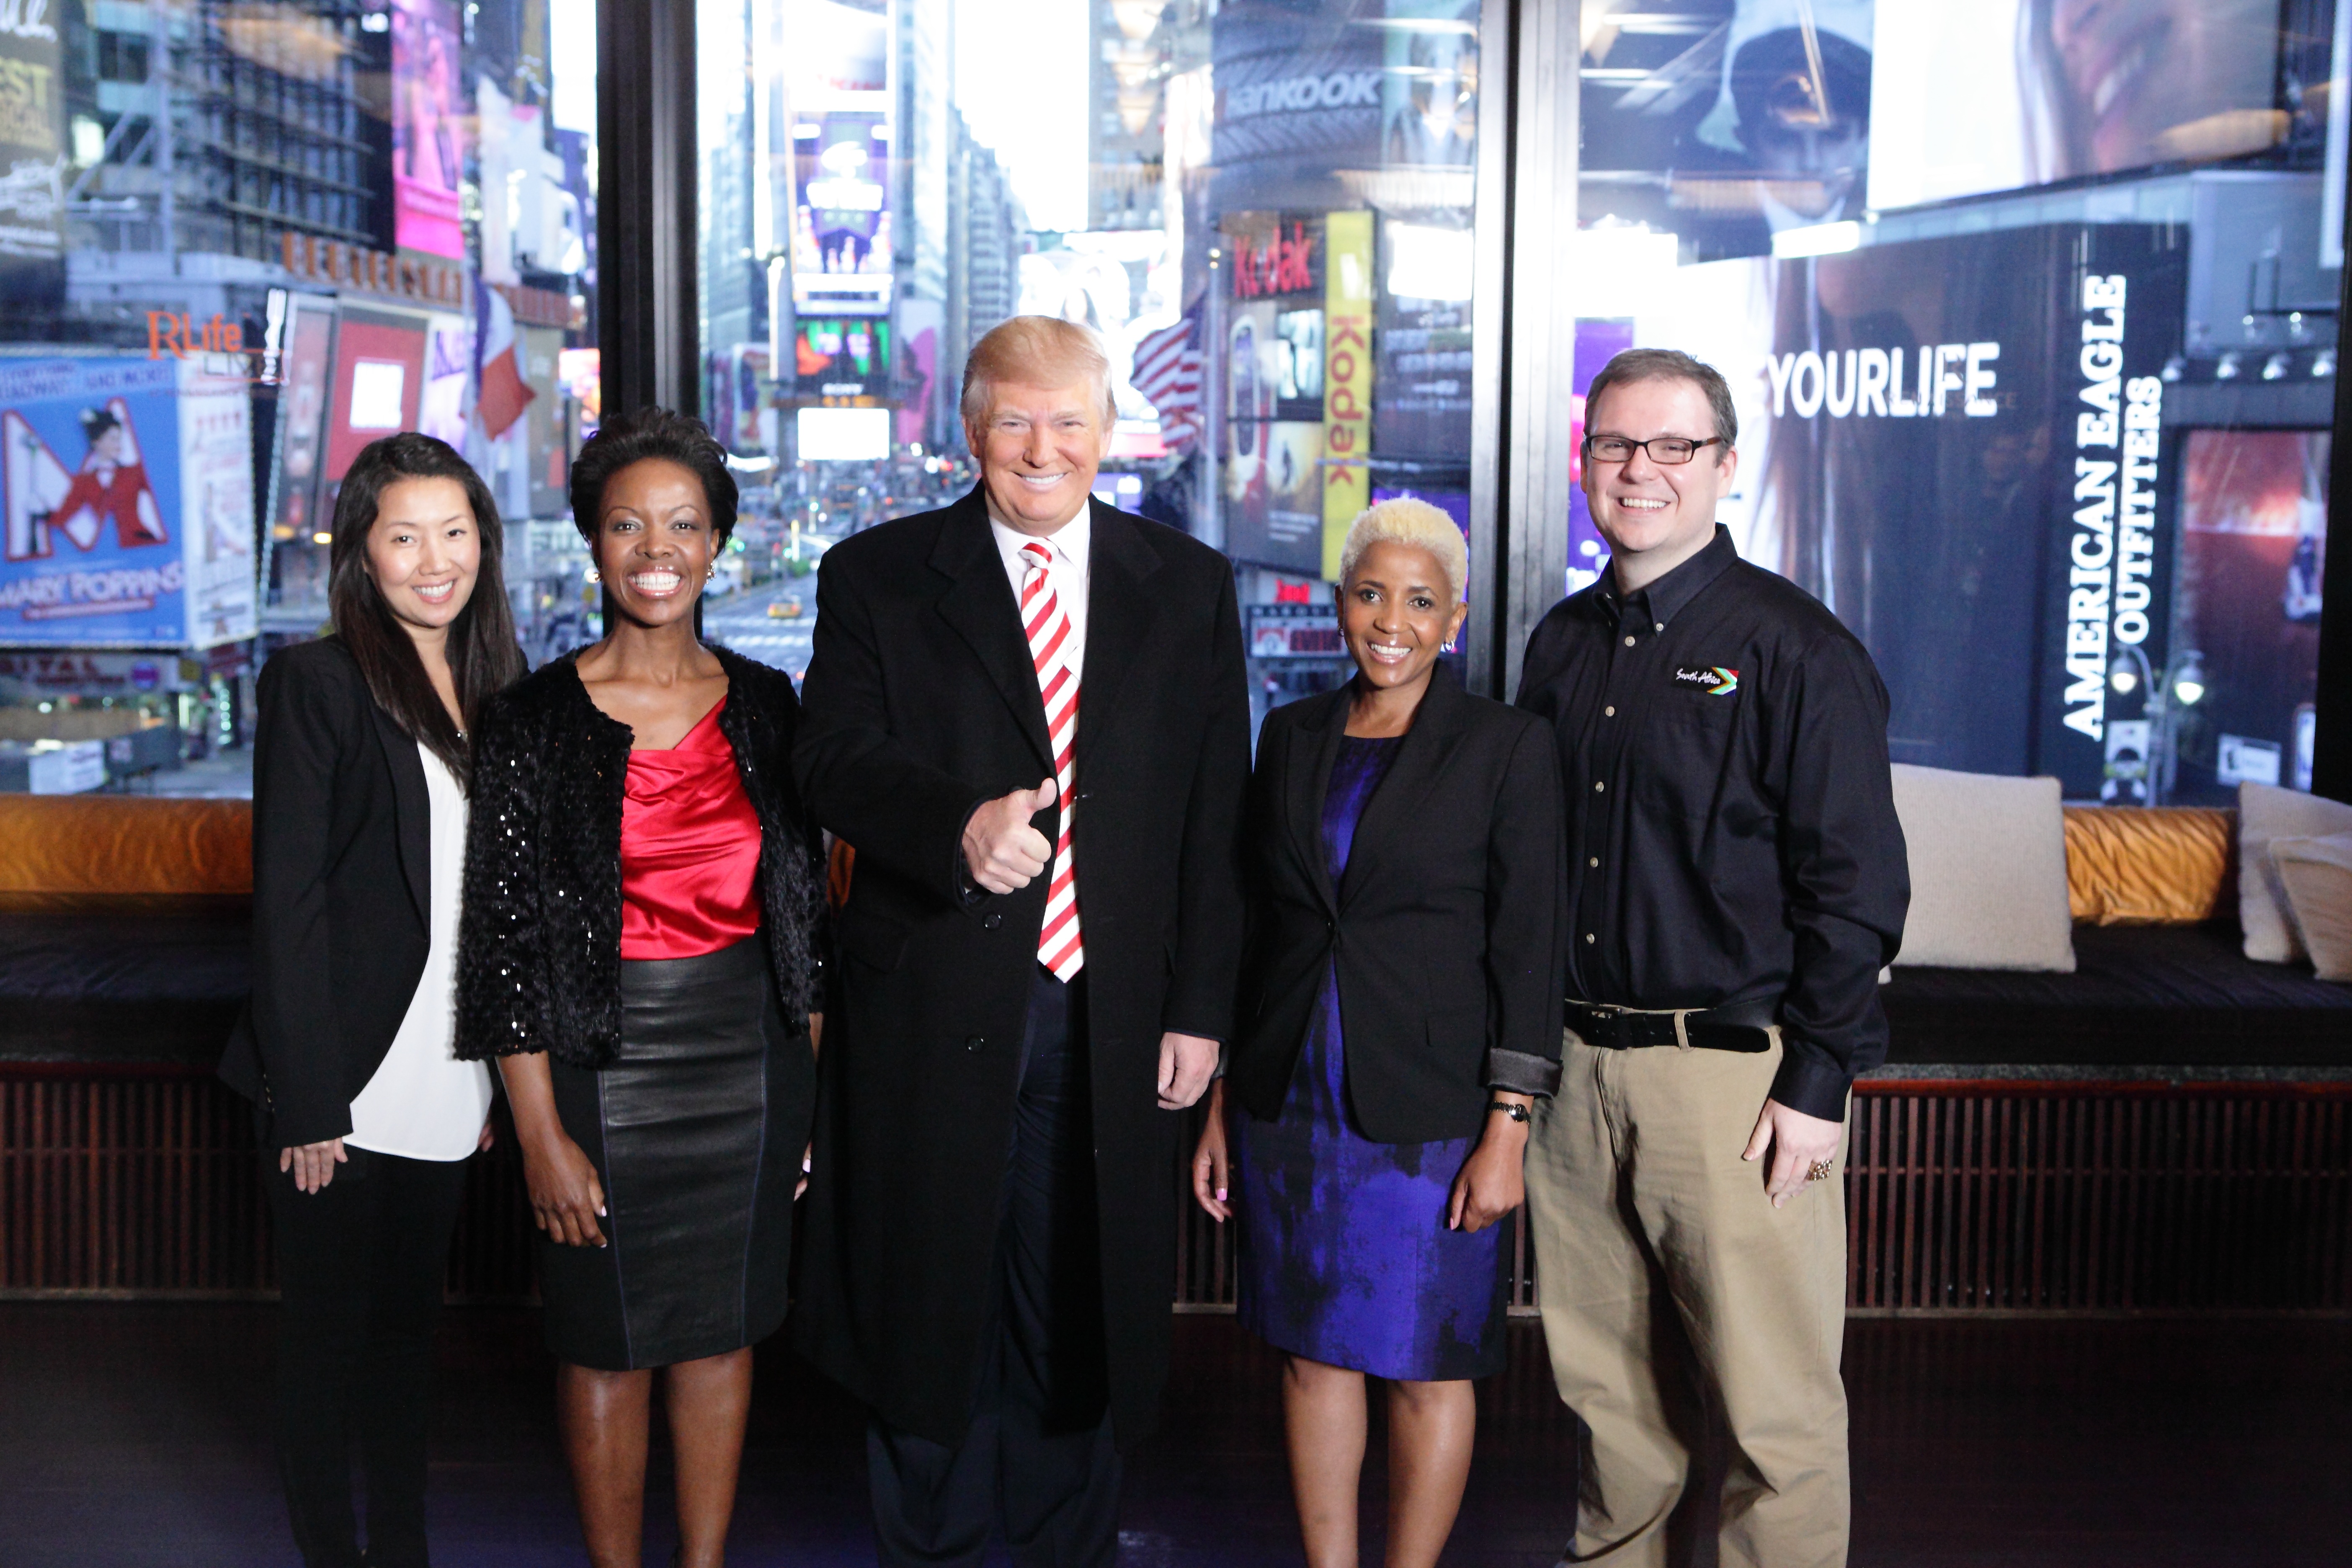 L to R: Min Tak, Sthu Zungu, Donald Trump, Evelyn Mahlaba and Justin Barnette during filming of The All-Star Celebrity Apprentice S13 E8.